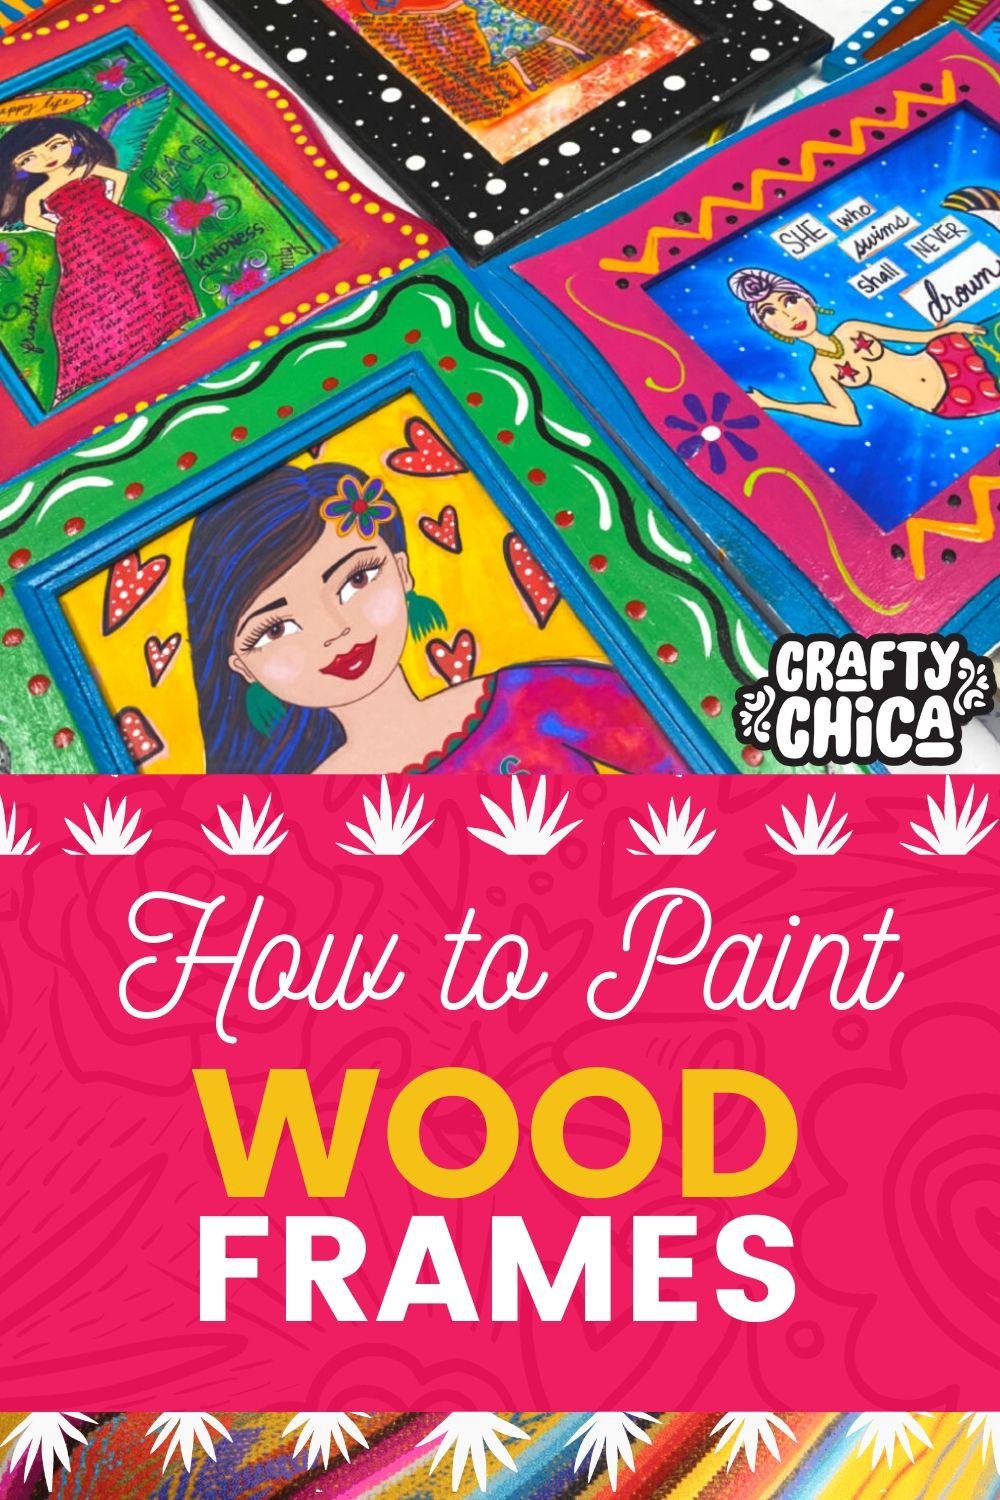 How to paint wood frames #craftychica #woodcrafts